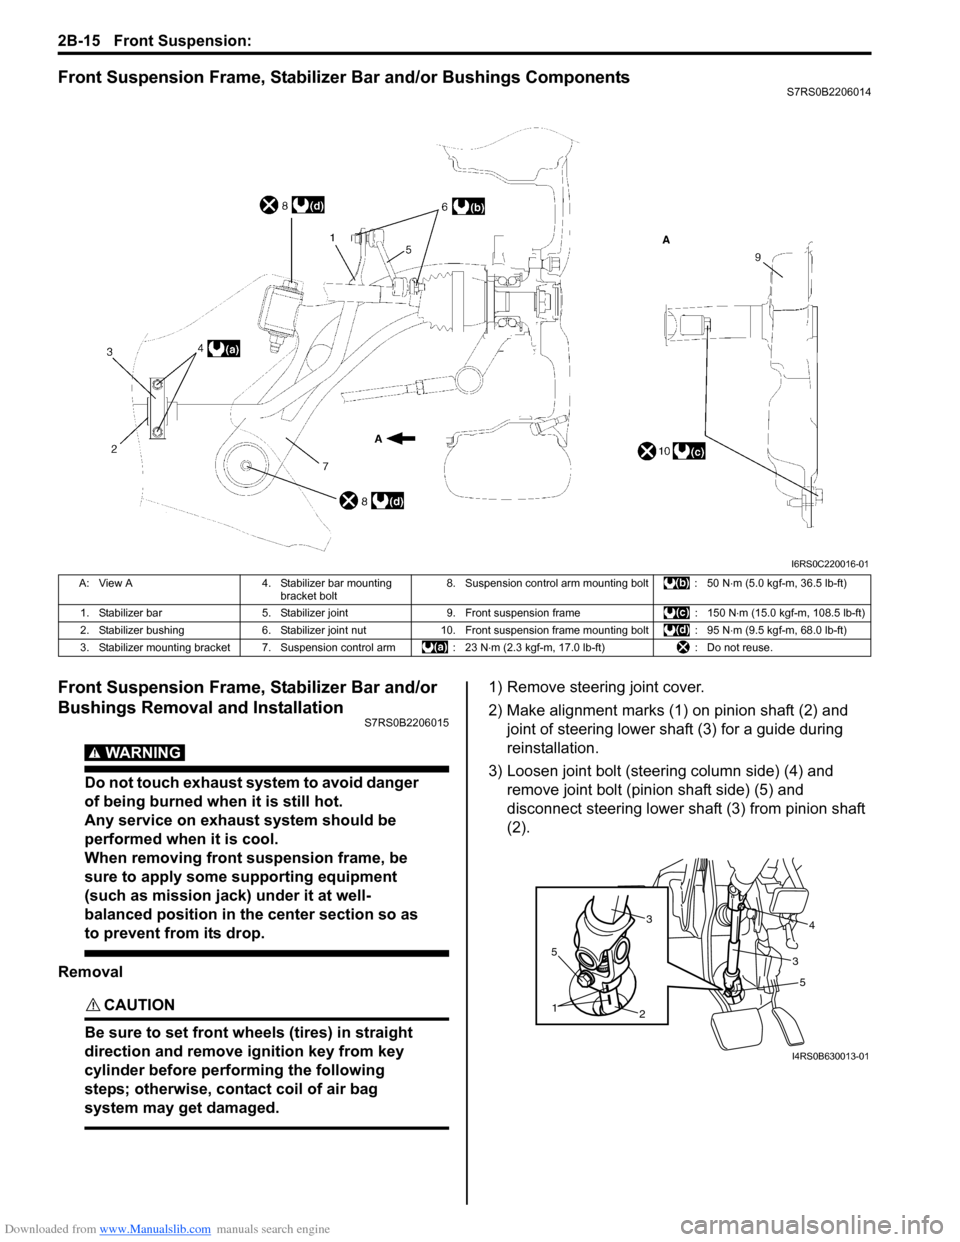 SUZUKI SWIFT 2007 2.G Service Owners Manual Downloaded from www.Manualslib.com manuals search engine 2B-15 Front Suspension: 
Front Suspension Frame, Stabilizer Bar and/or Bushings ComponentsS7RS0B2206014
Front Suspension Frame, Stabilizer Bar 